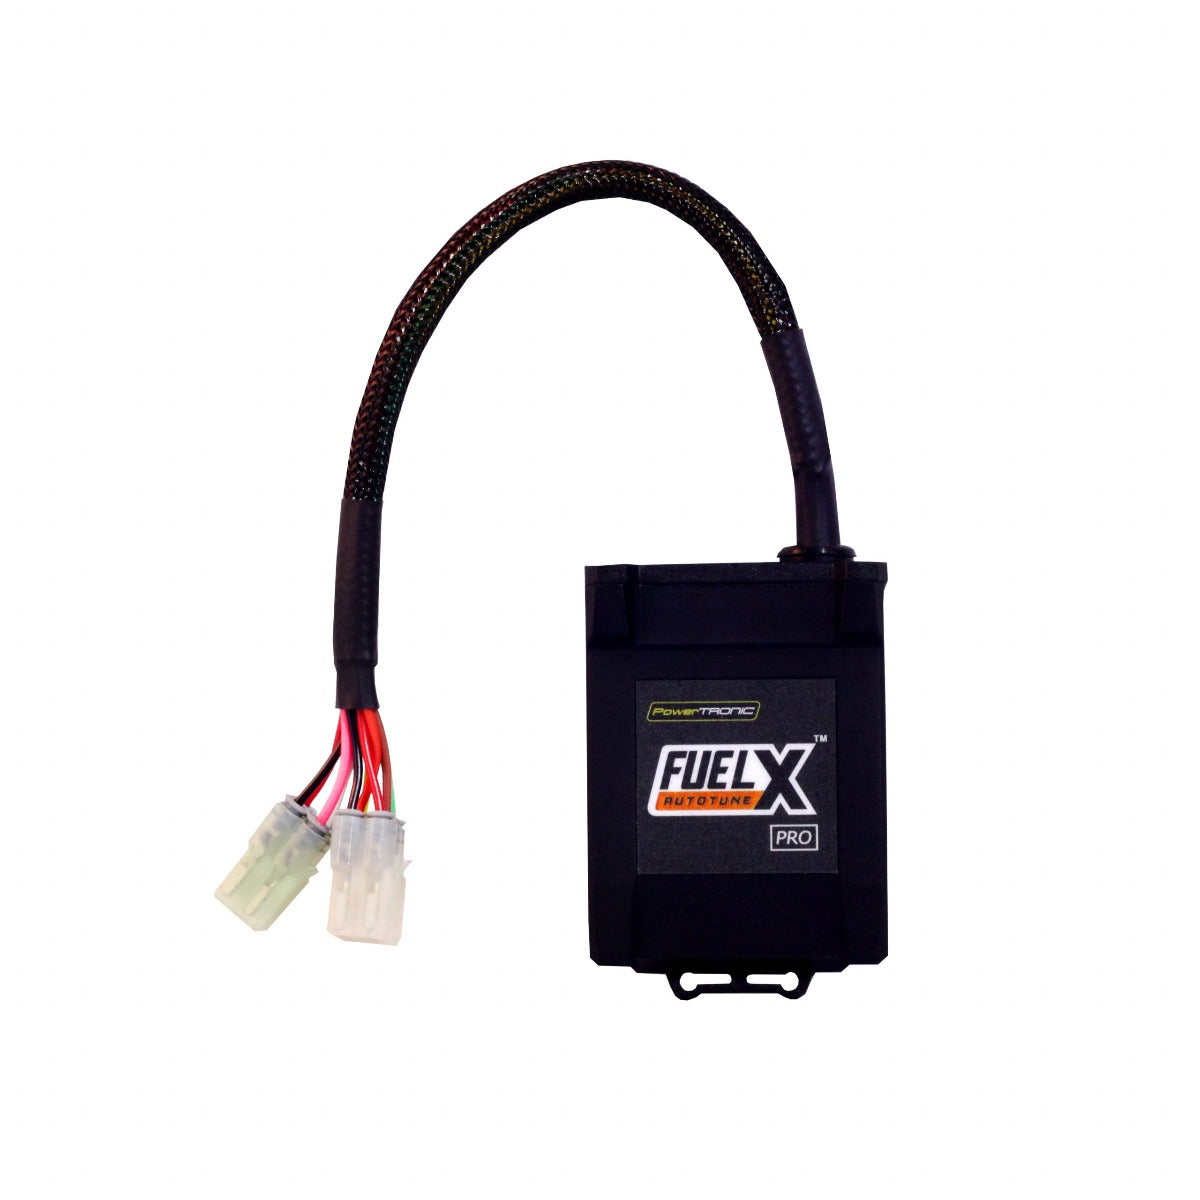 FuelX Autotune Pro Fuel Injection Optimizer for Jawa - 1